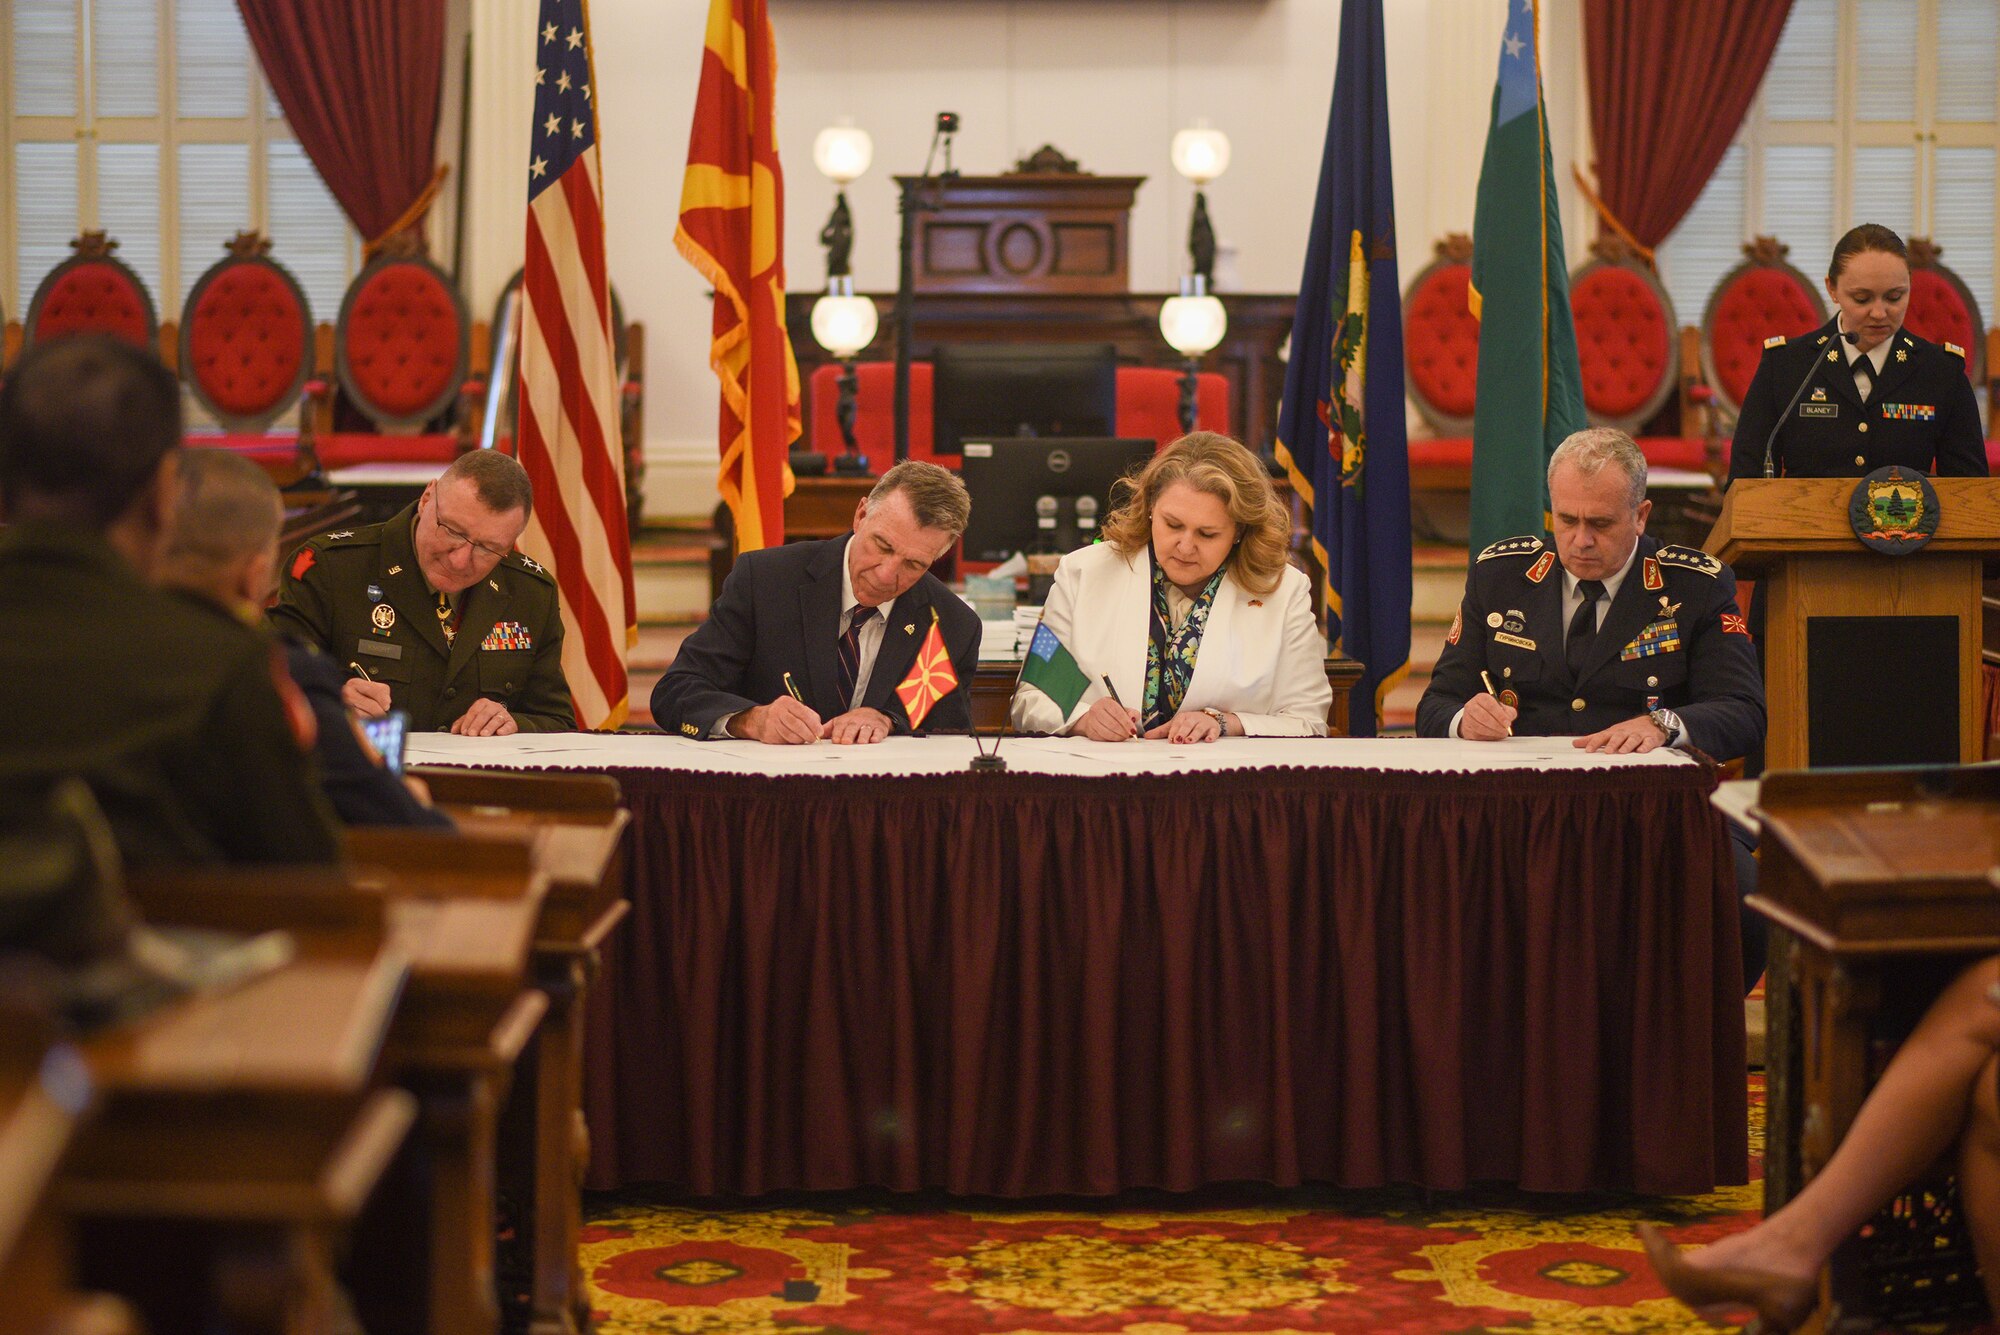 (Left to Right) U.S. Army Maj. Gen. Greg Knight, Vermont National Guard Adjutant General, Gov. Phil Scott, Vermont Governor, Minister Slavjanka Petrovska, North Macedonia Minister of Defense, Lt. Gen. Vasko Gjurchinovski, North Macedonia Chief of Defense sign documents reaffirming North Macedonia’s and the Vermont National Guard’s continued partnership, Montpelier, Vt. June 9, 2023.